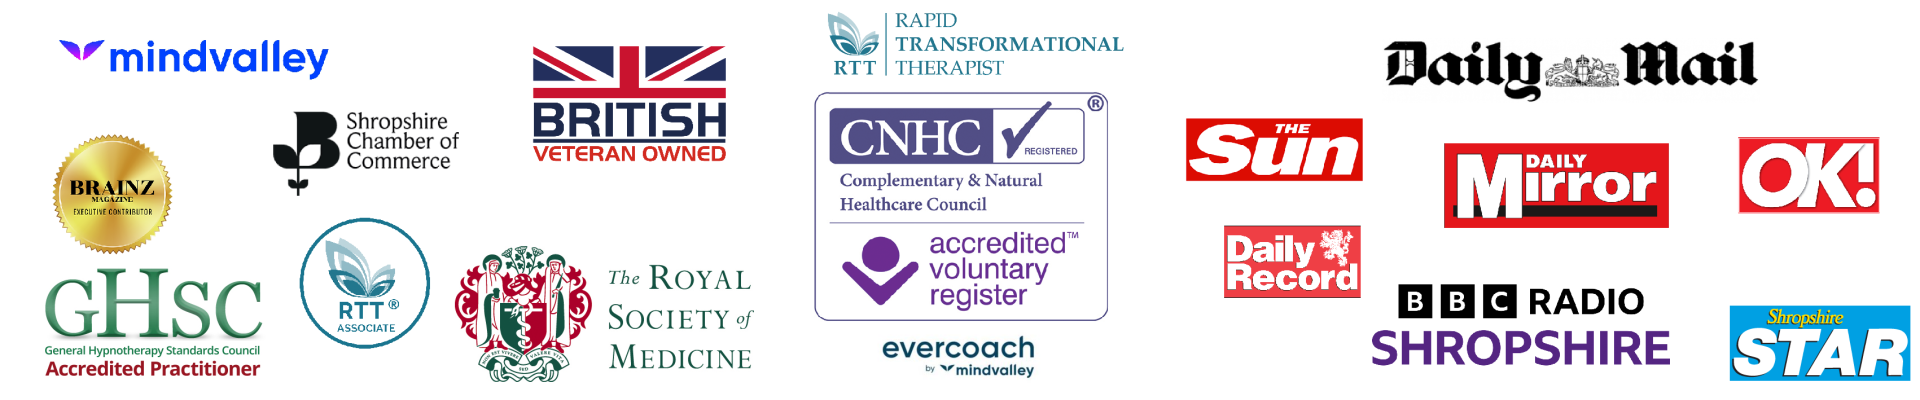 Accredited Life Coach
Accredited Hypnotherapist
Celebrity Therpist